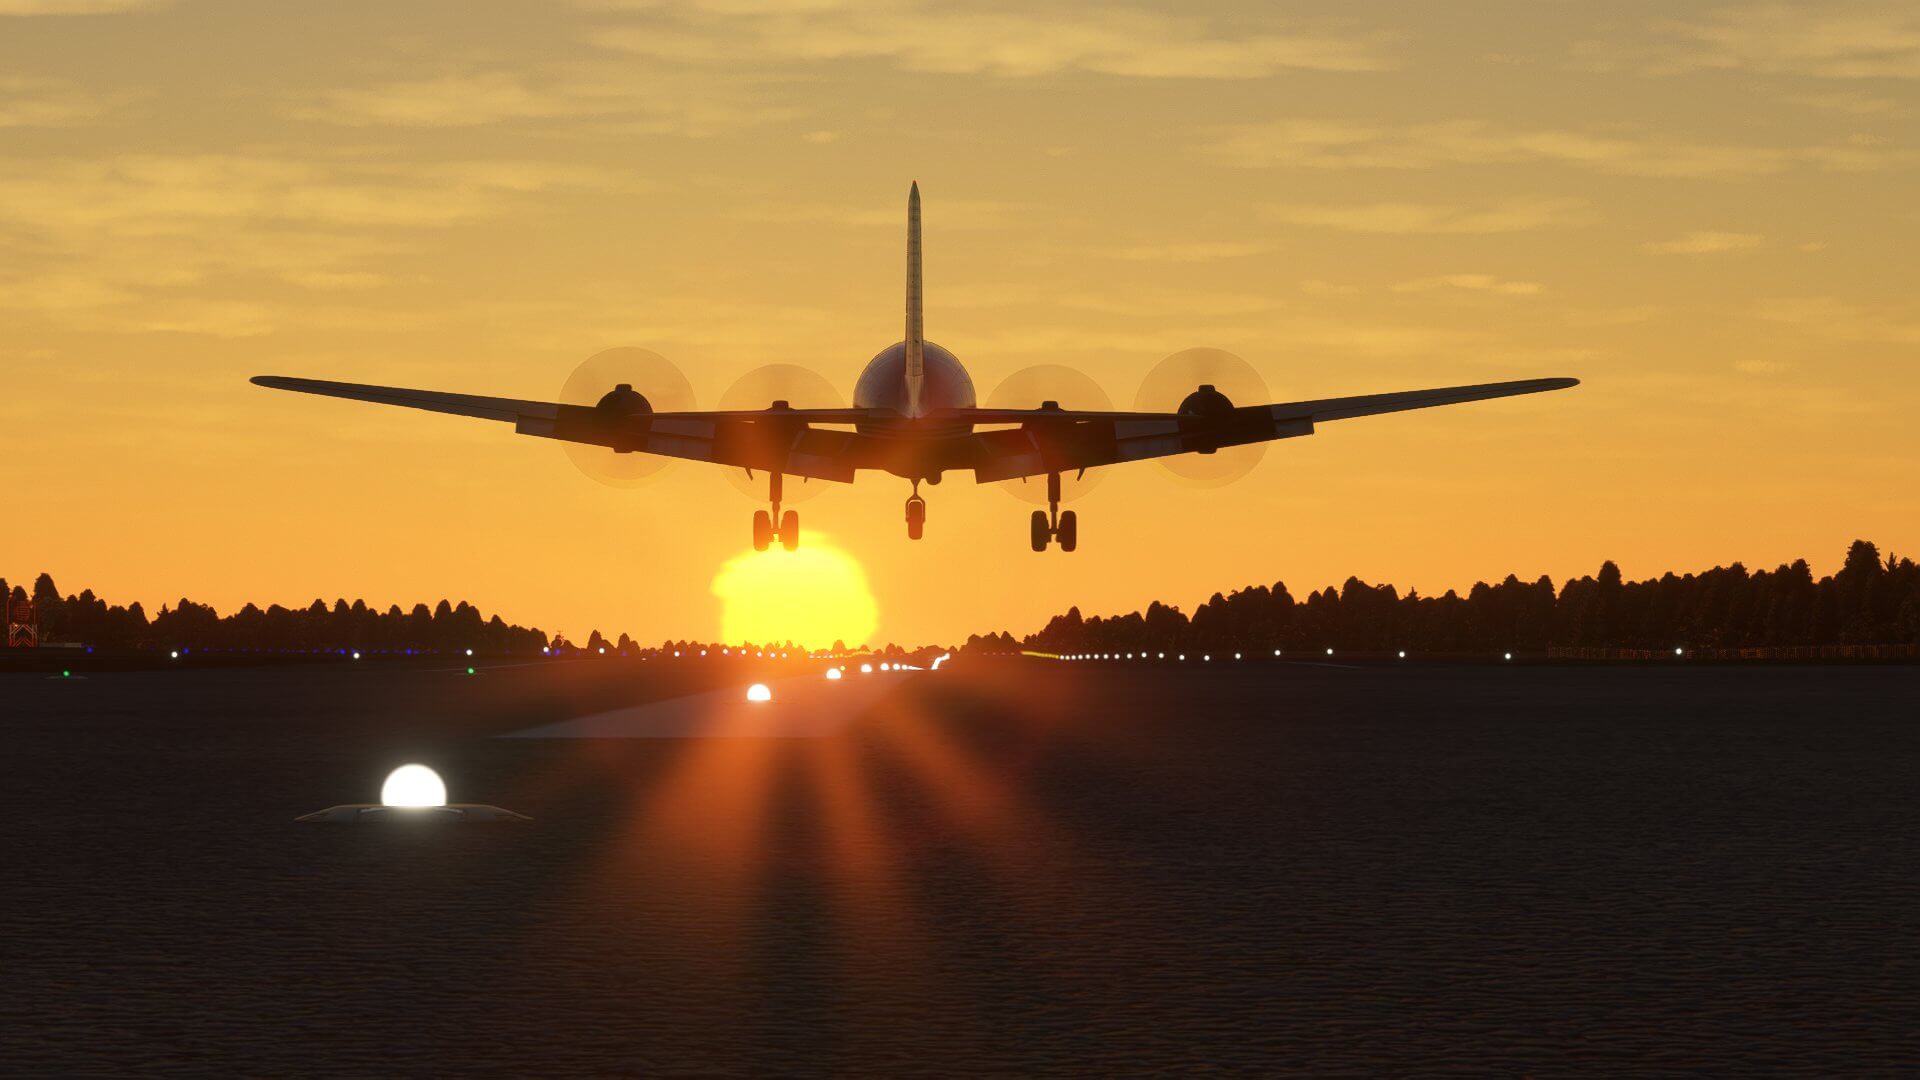 The silhouette of a DC-6 takes off with landing gear still down towards the sun at golden hour.